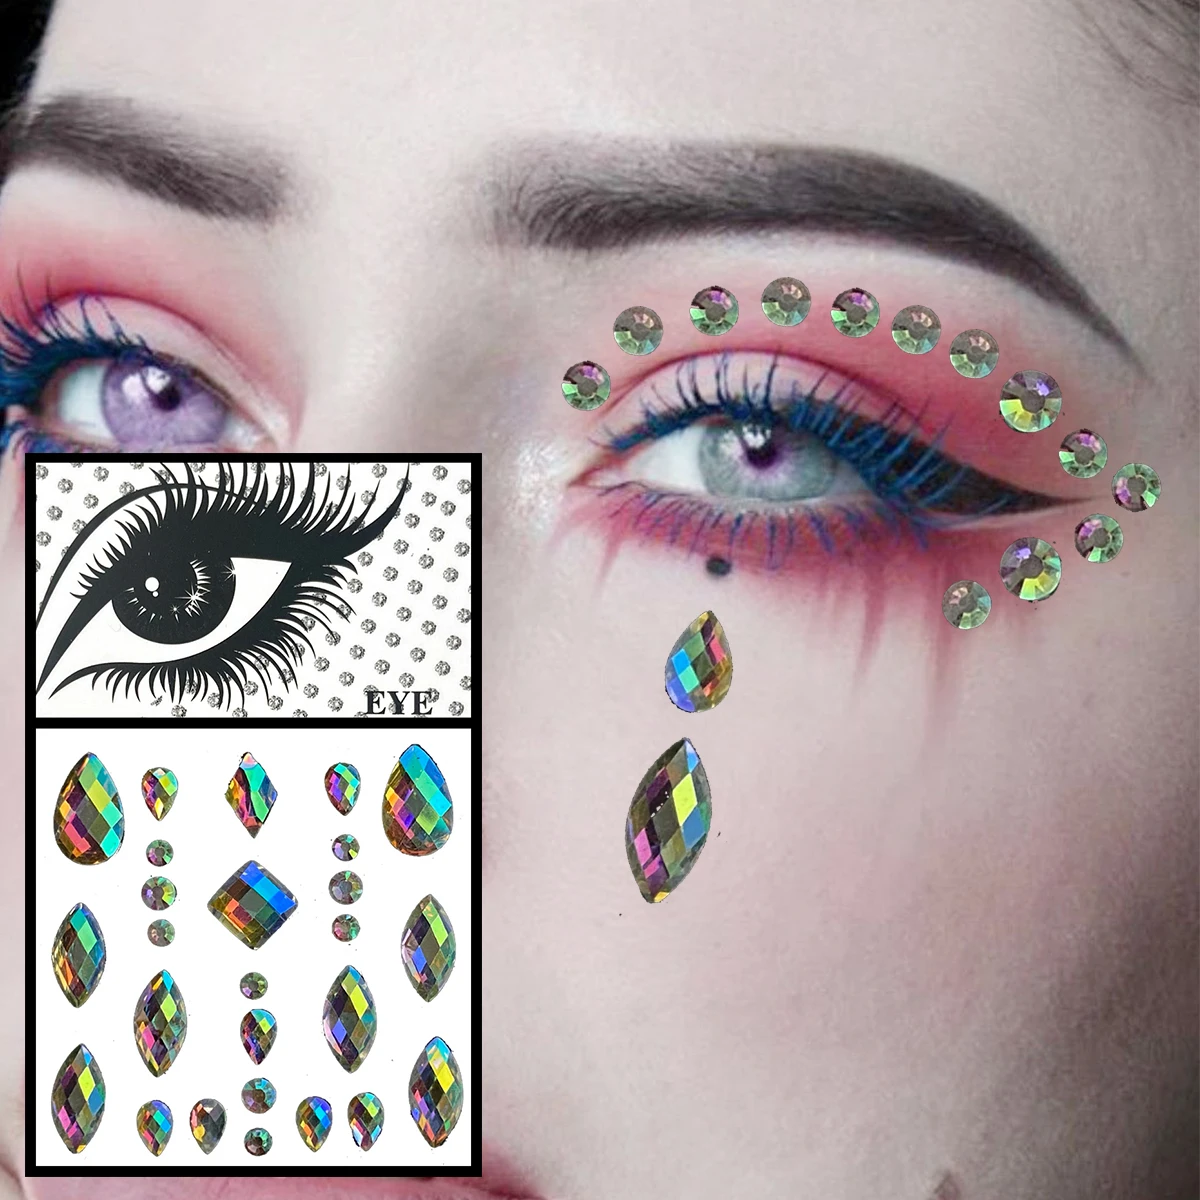 

Face Gems For Women Temporary Tattoos Eyes Body Diamonds Crystals Jewels Makeup Sticker Shiny Tears Jewelry Festival Decoration